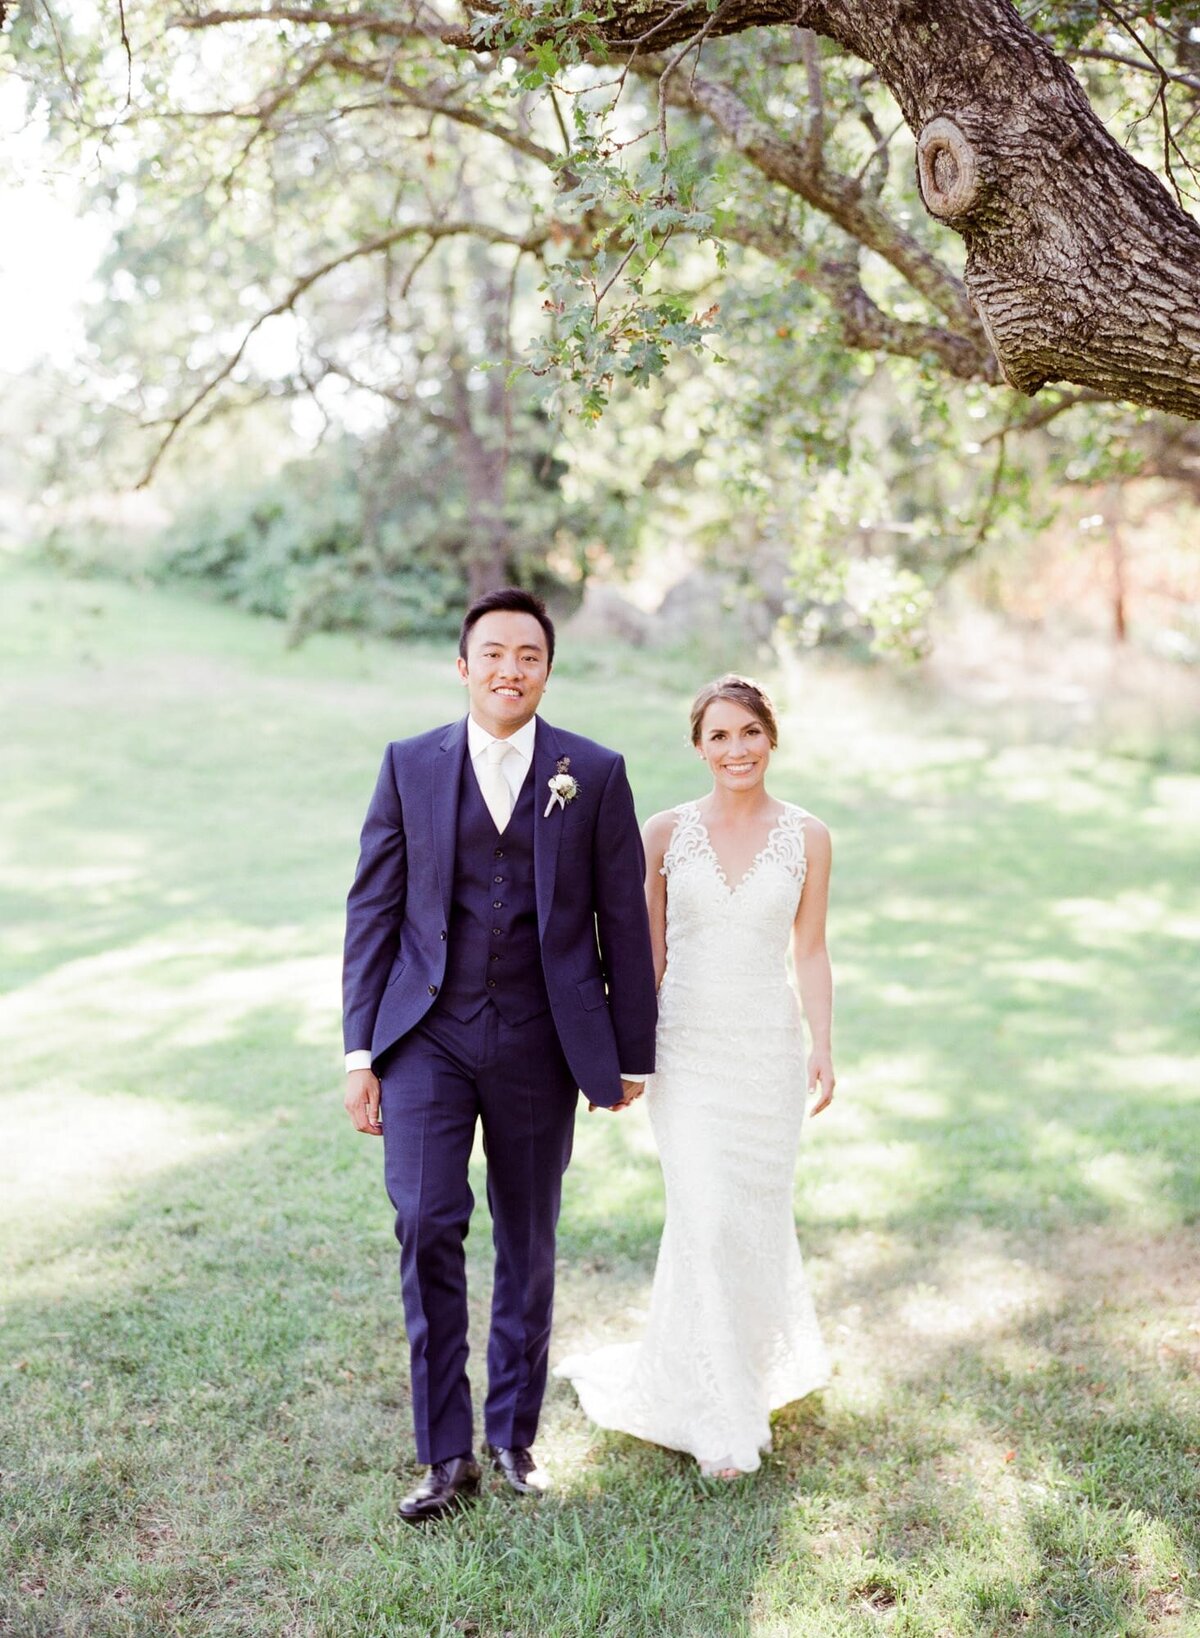 After an impressive farm wedding at a farm, newly-wed couple hold hands and walk towards the camera beneath a soothing tree shade.